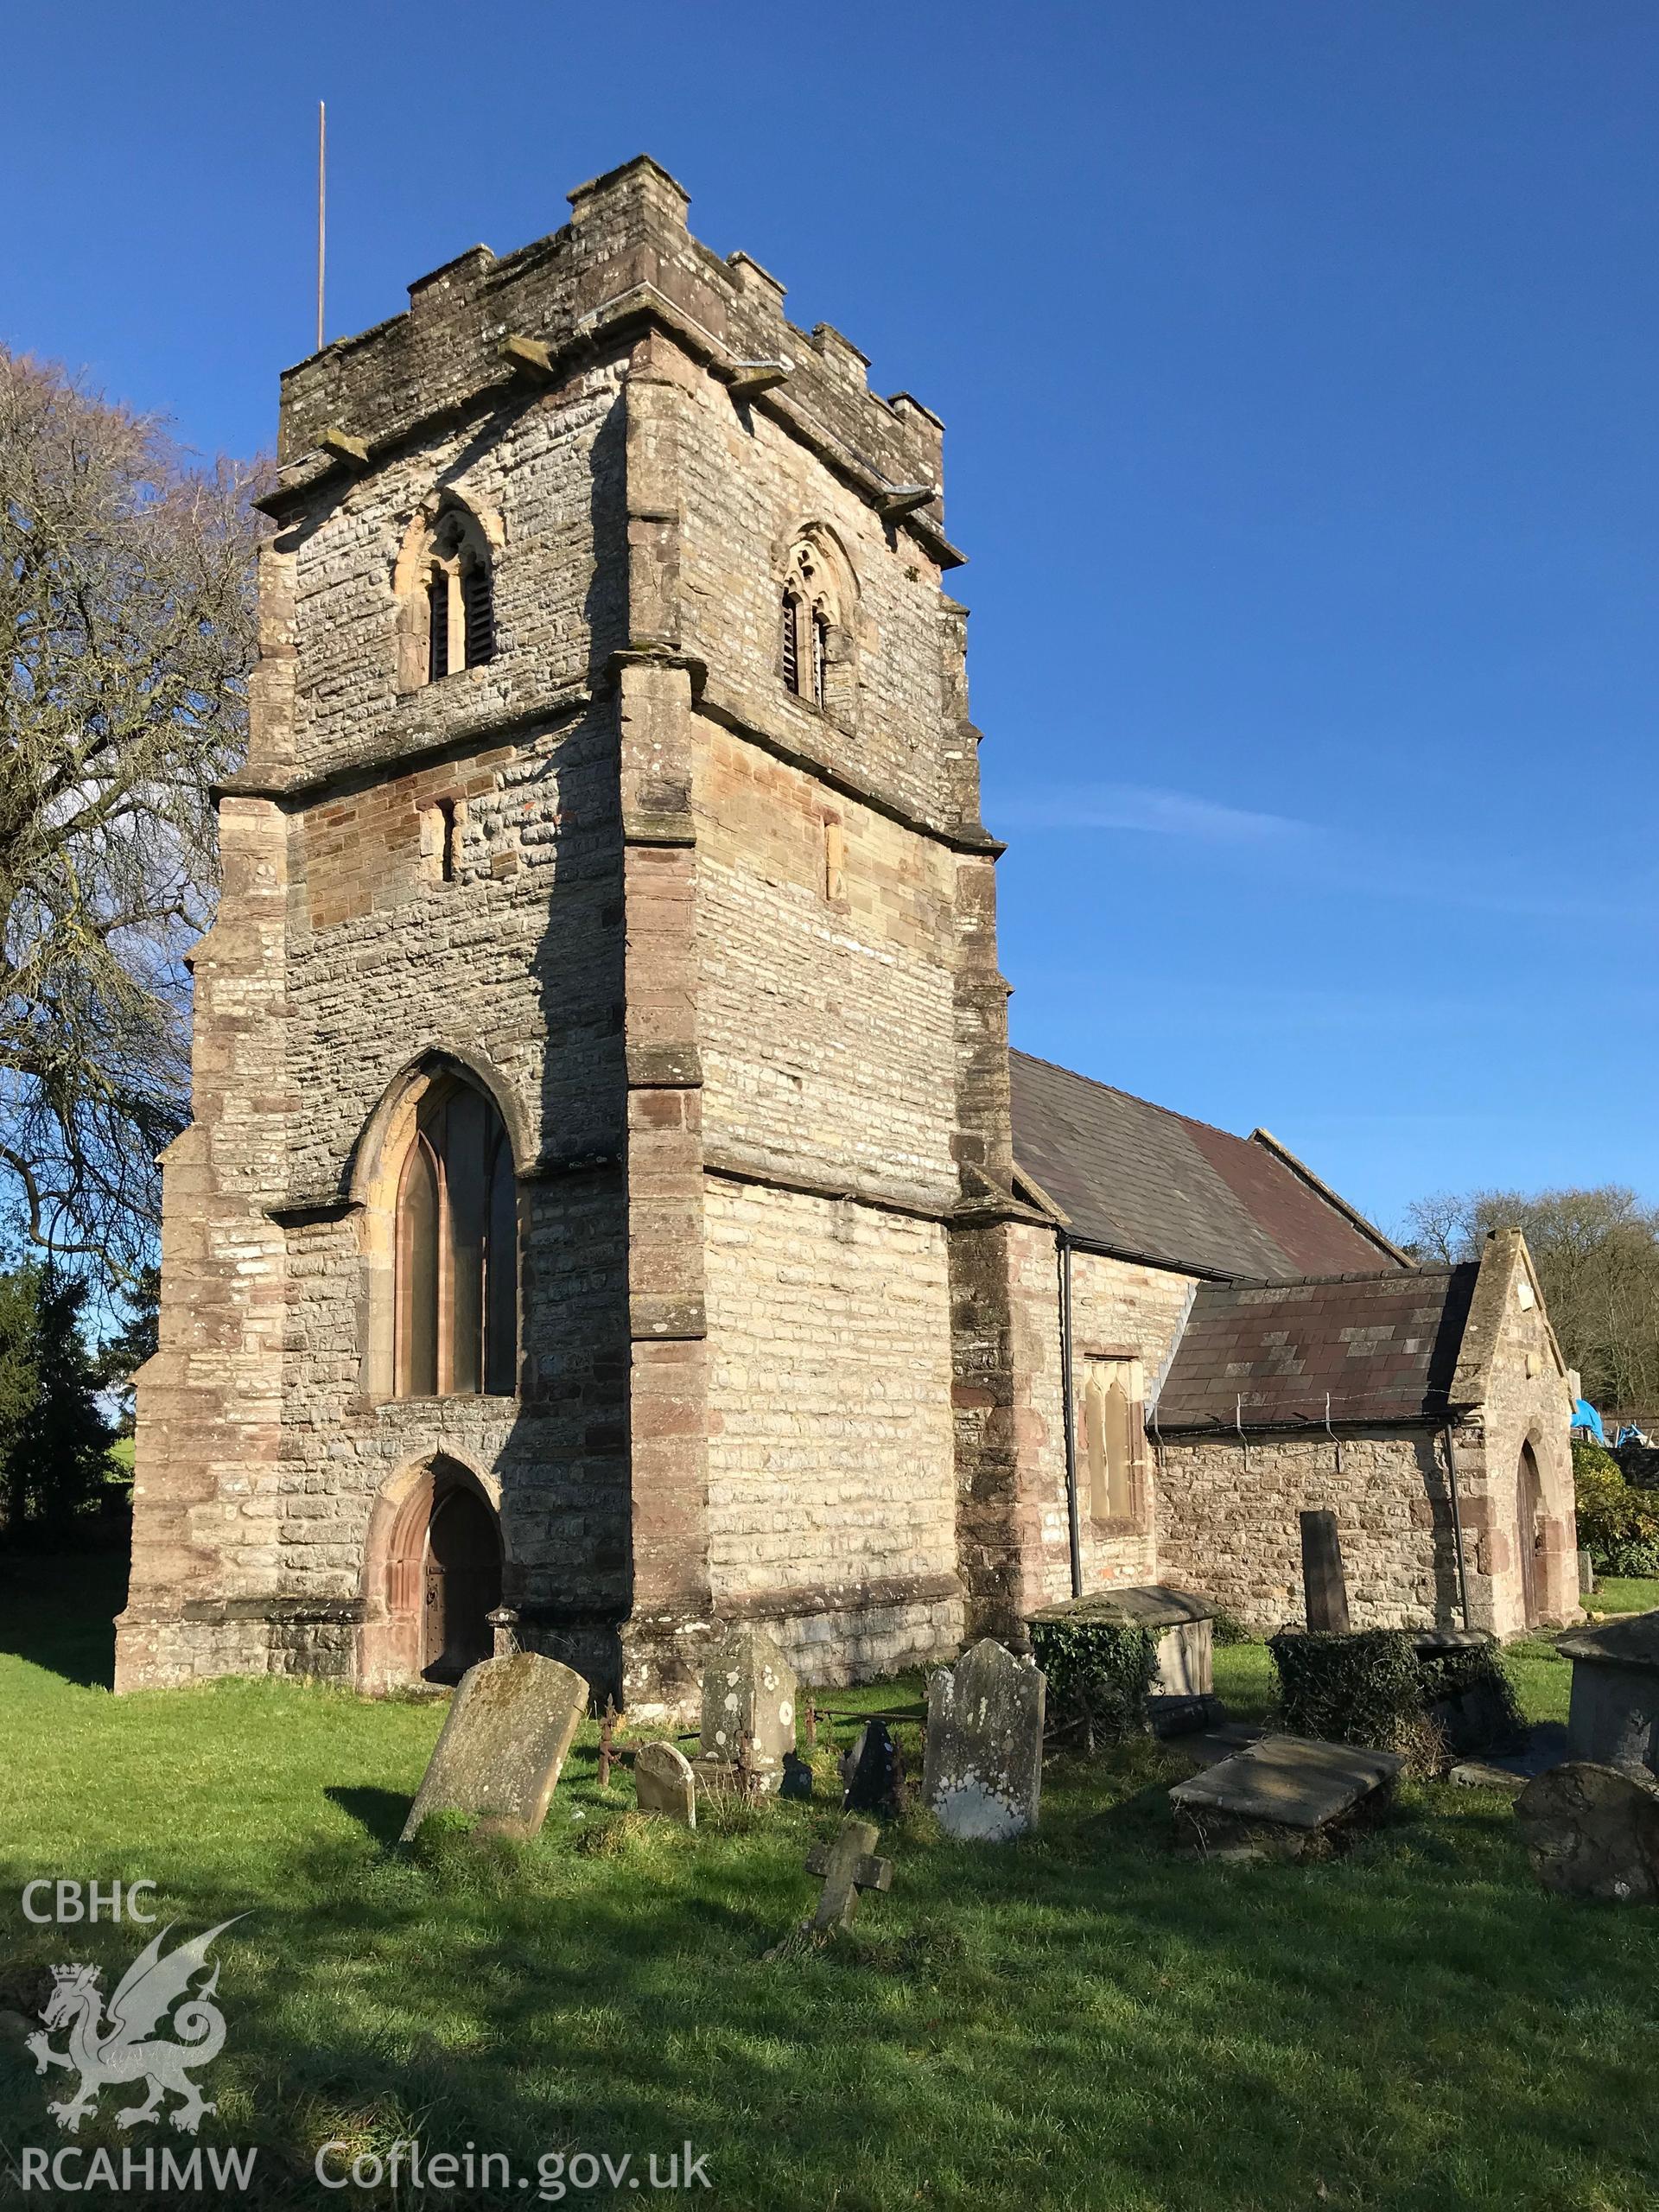 Colour photograph showing exterior view of St. Mary's church, Llanwern, east of Newport, taken by Paul R. Davis on 4th February 2019.